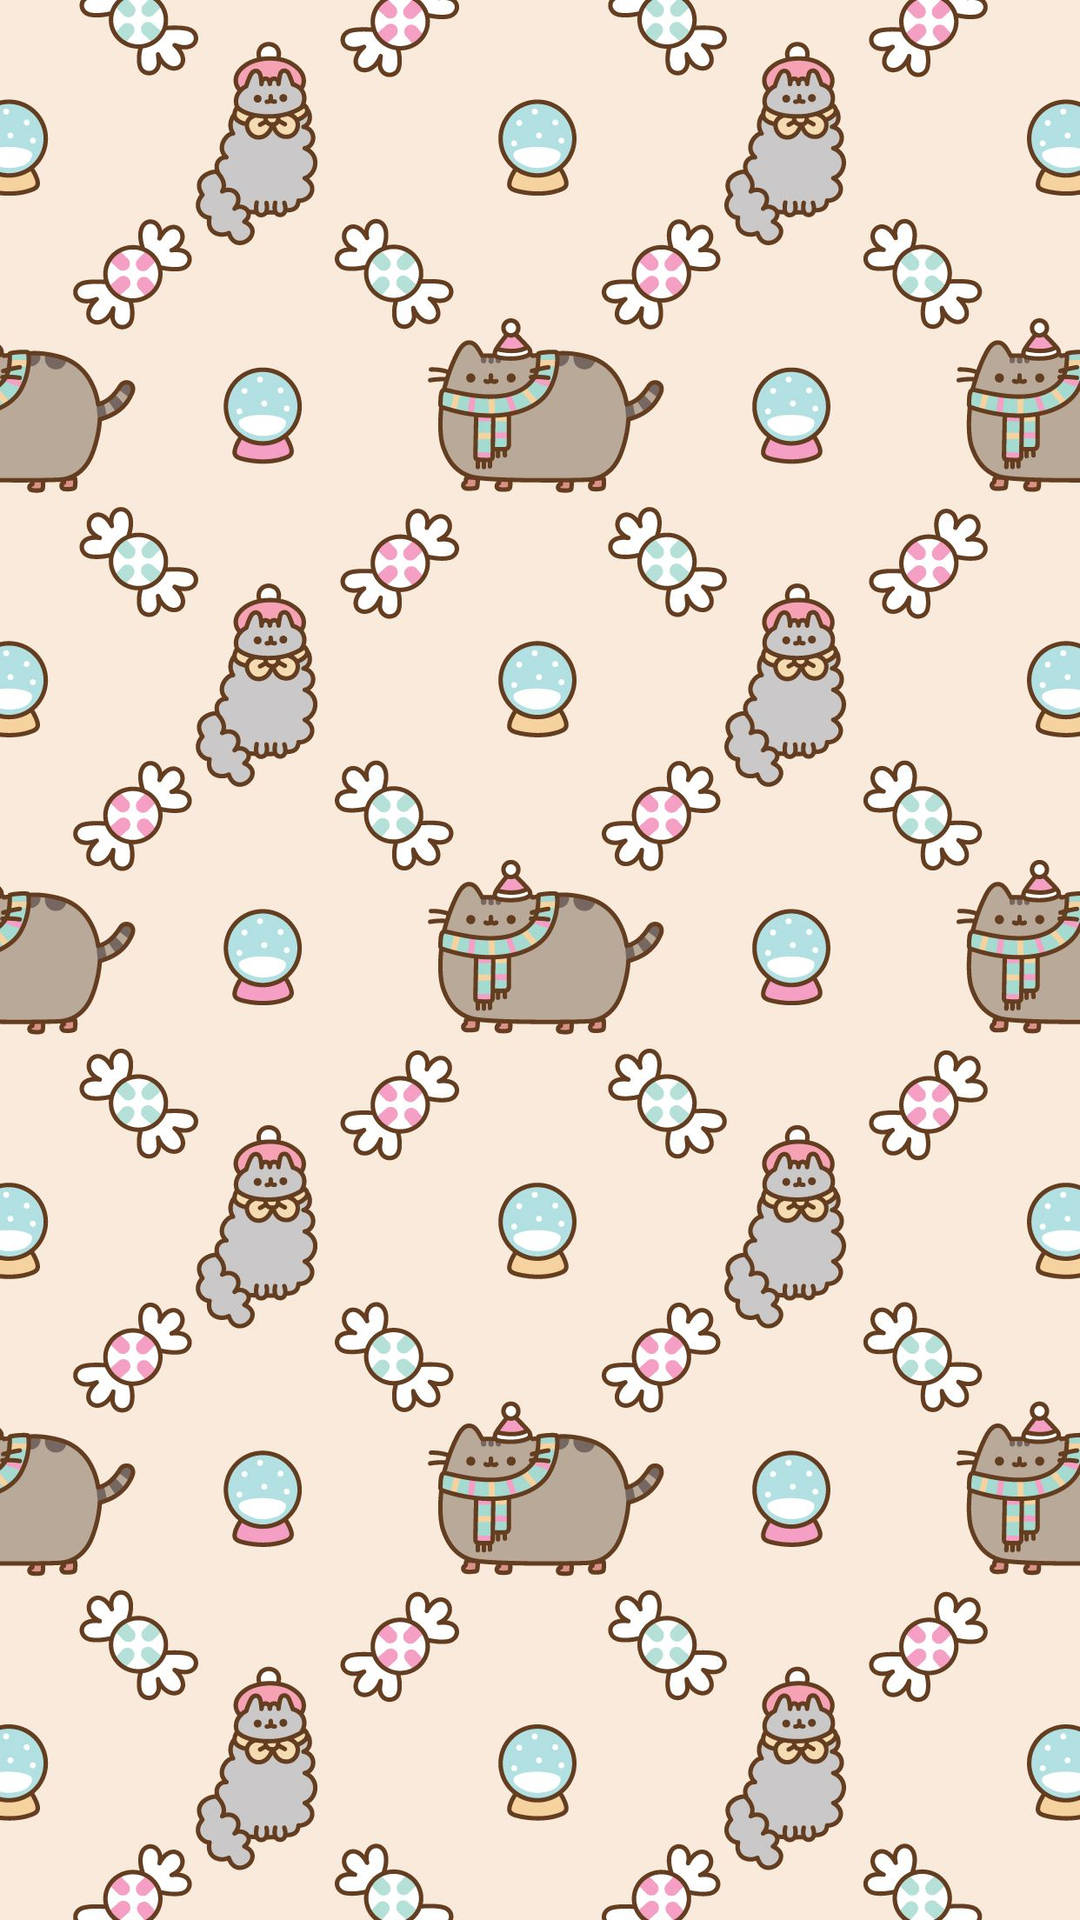 Celebrating Christmas with Pusheen & Stormy Wallpaper